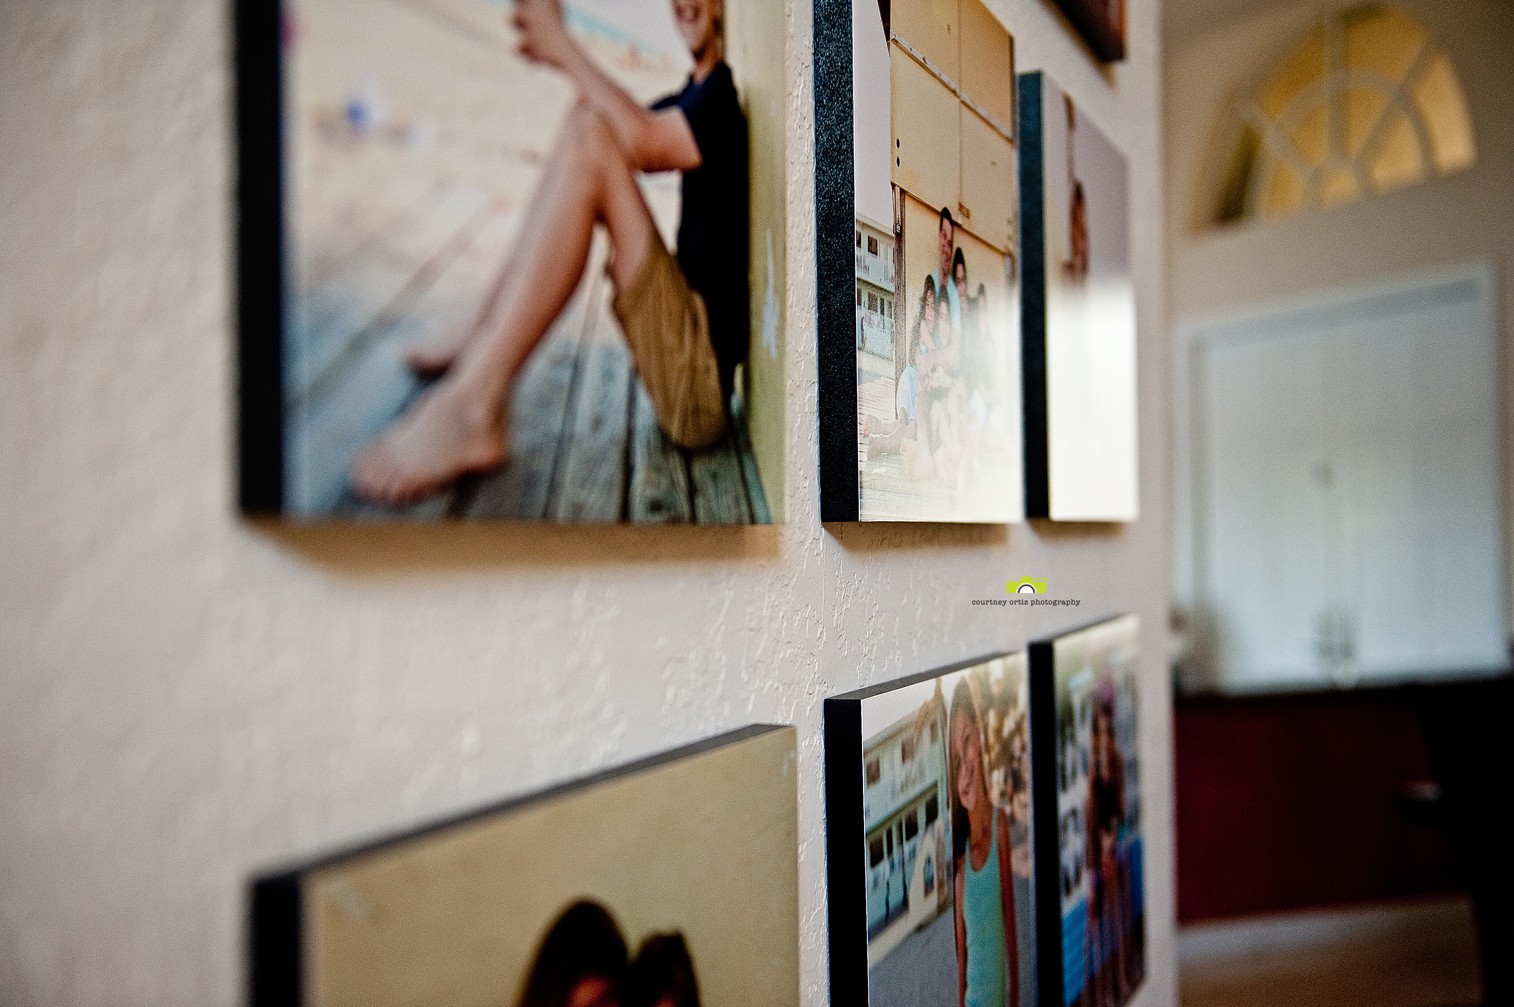 12x12_9_grid_reed_courtney_ortiz_photography-5